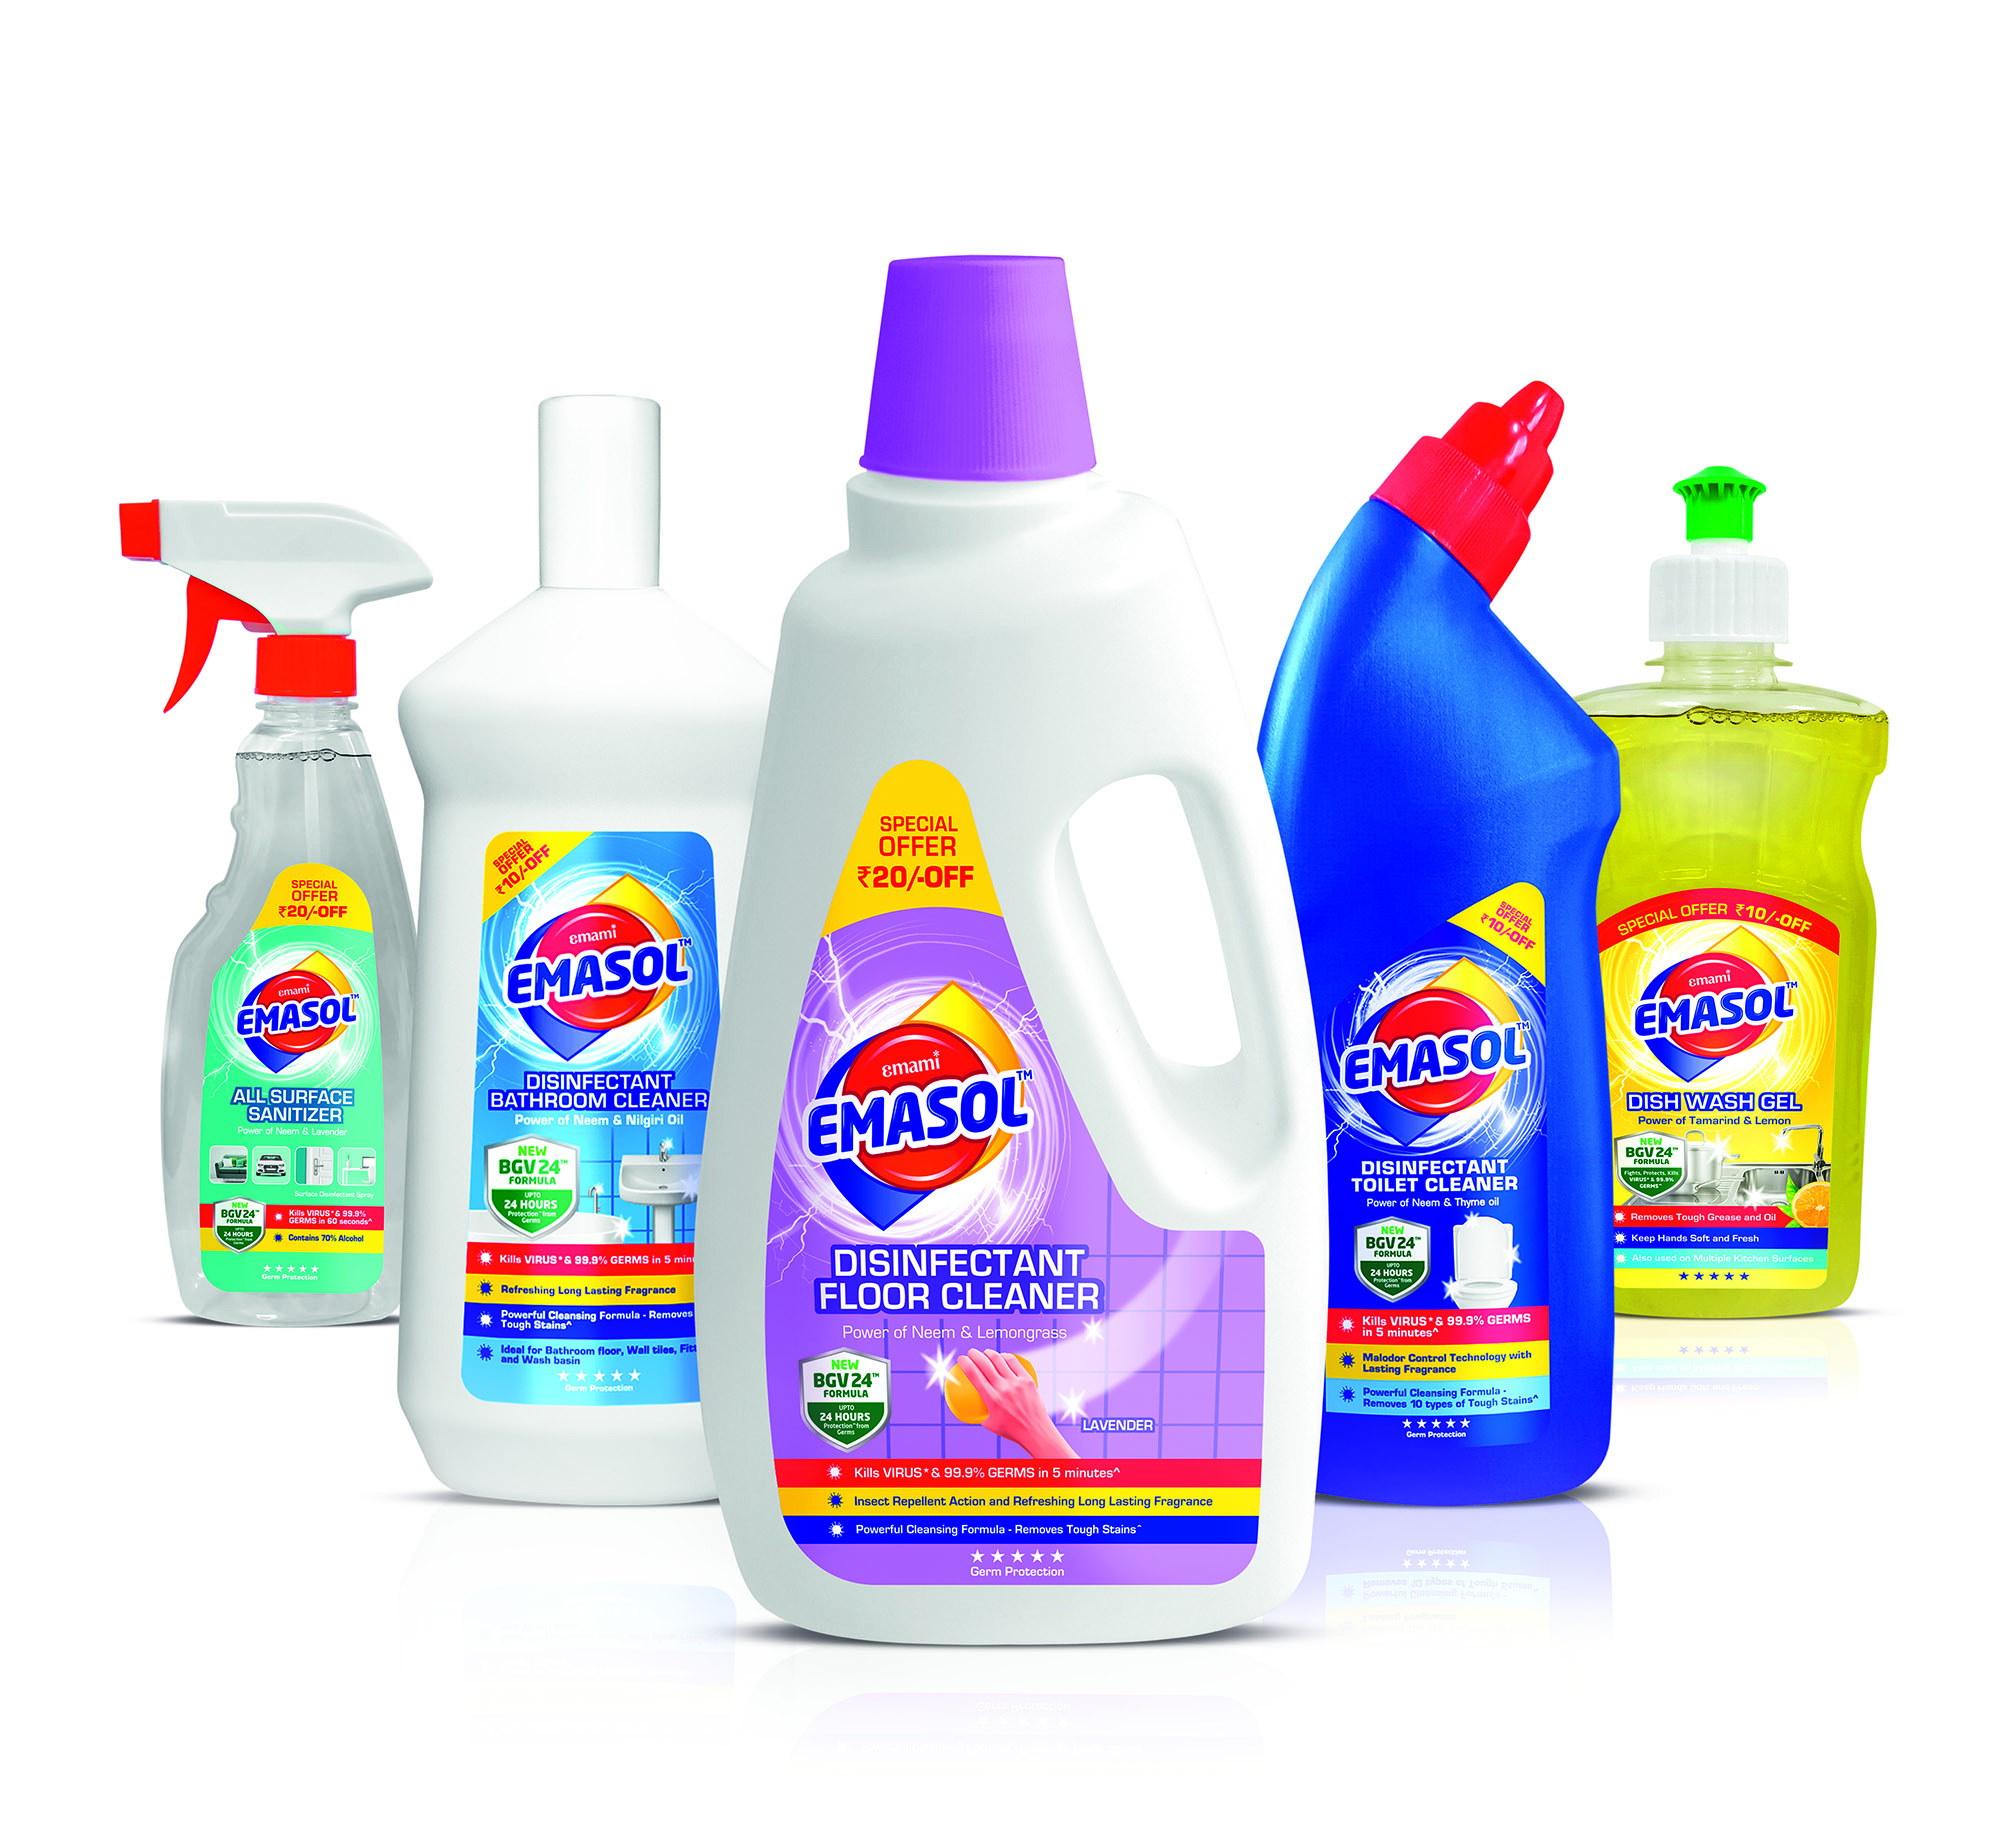 Emami Ltd Forays into Home Hygiene Space With ‘EMASOL’A Complete Range of Home Hygiene Products